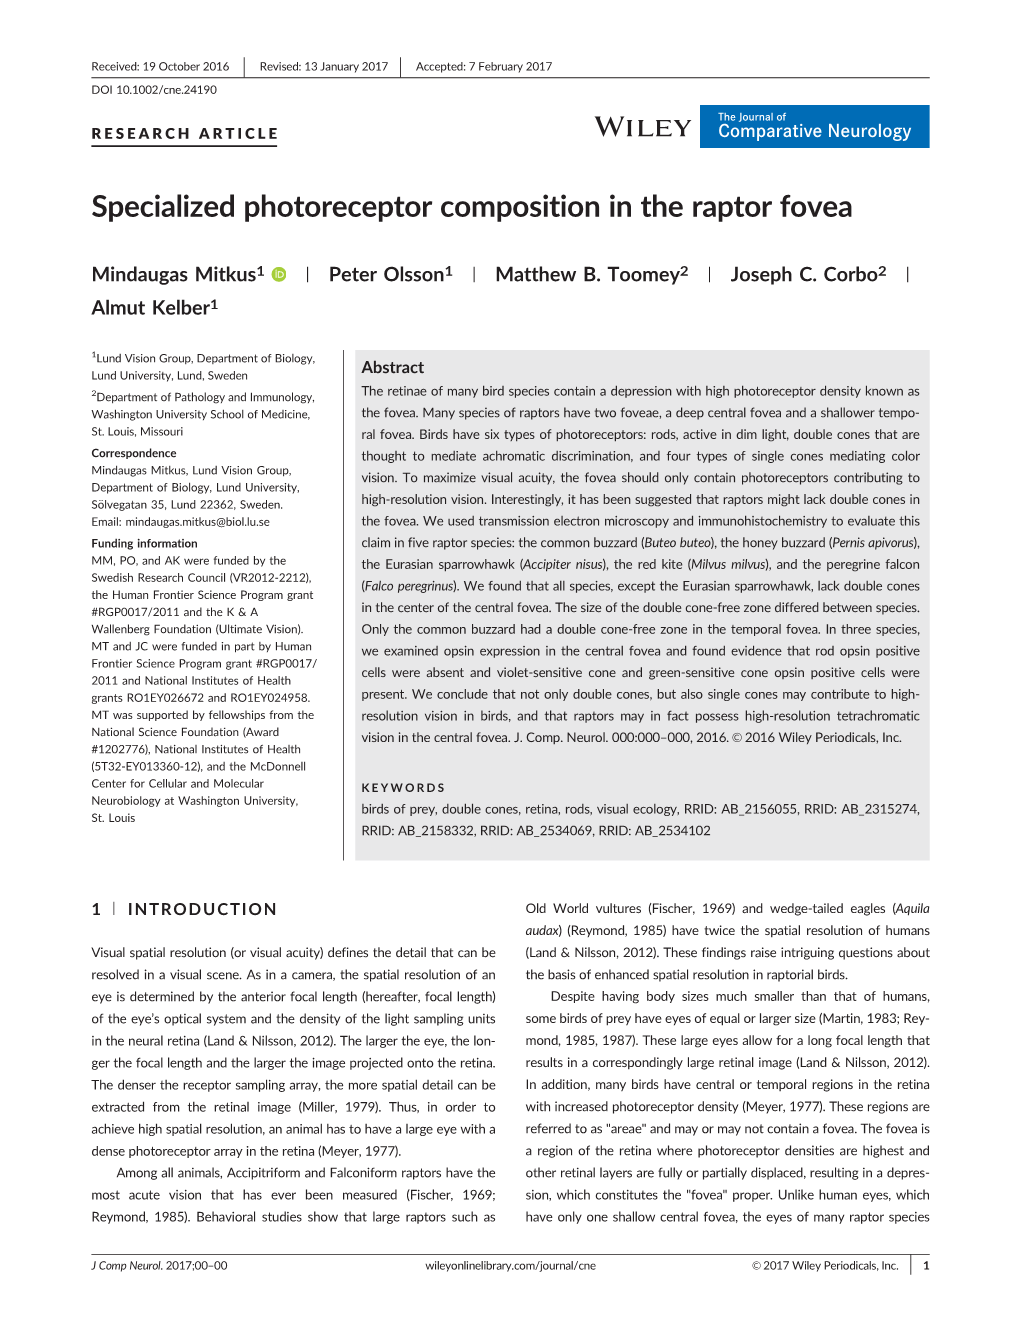 Specialized Photoreceptor Composition in the Raptor Fovea